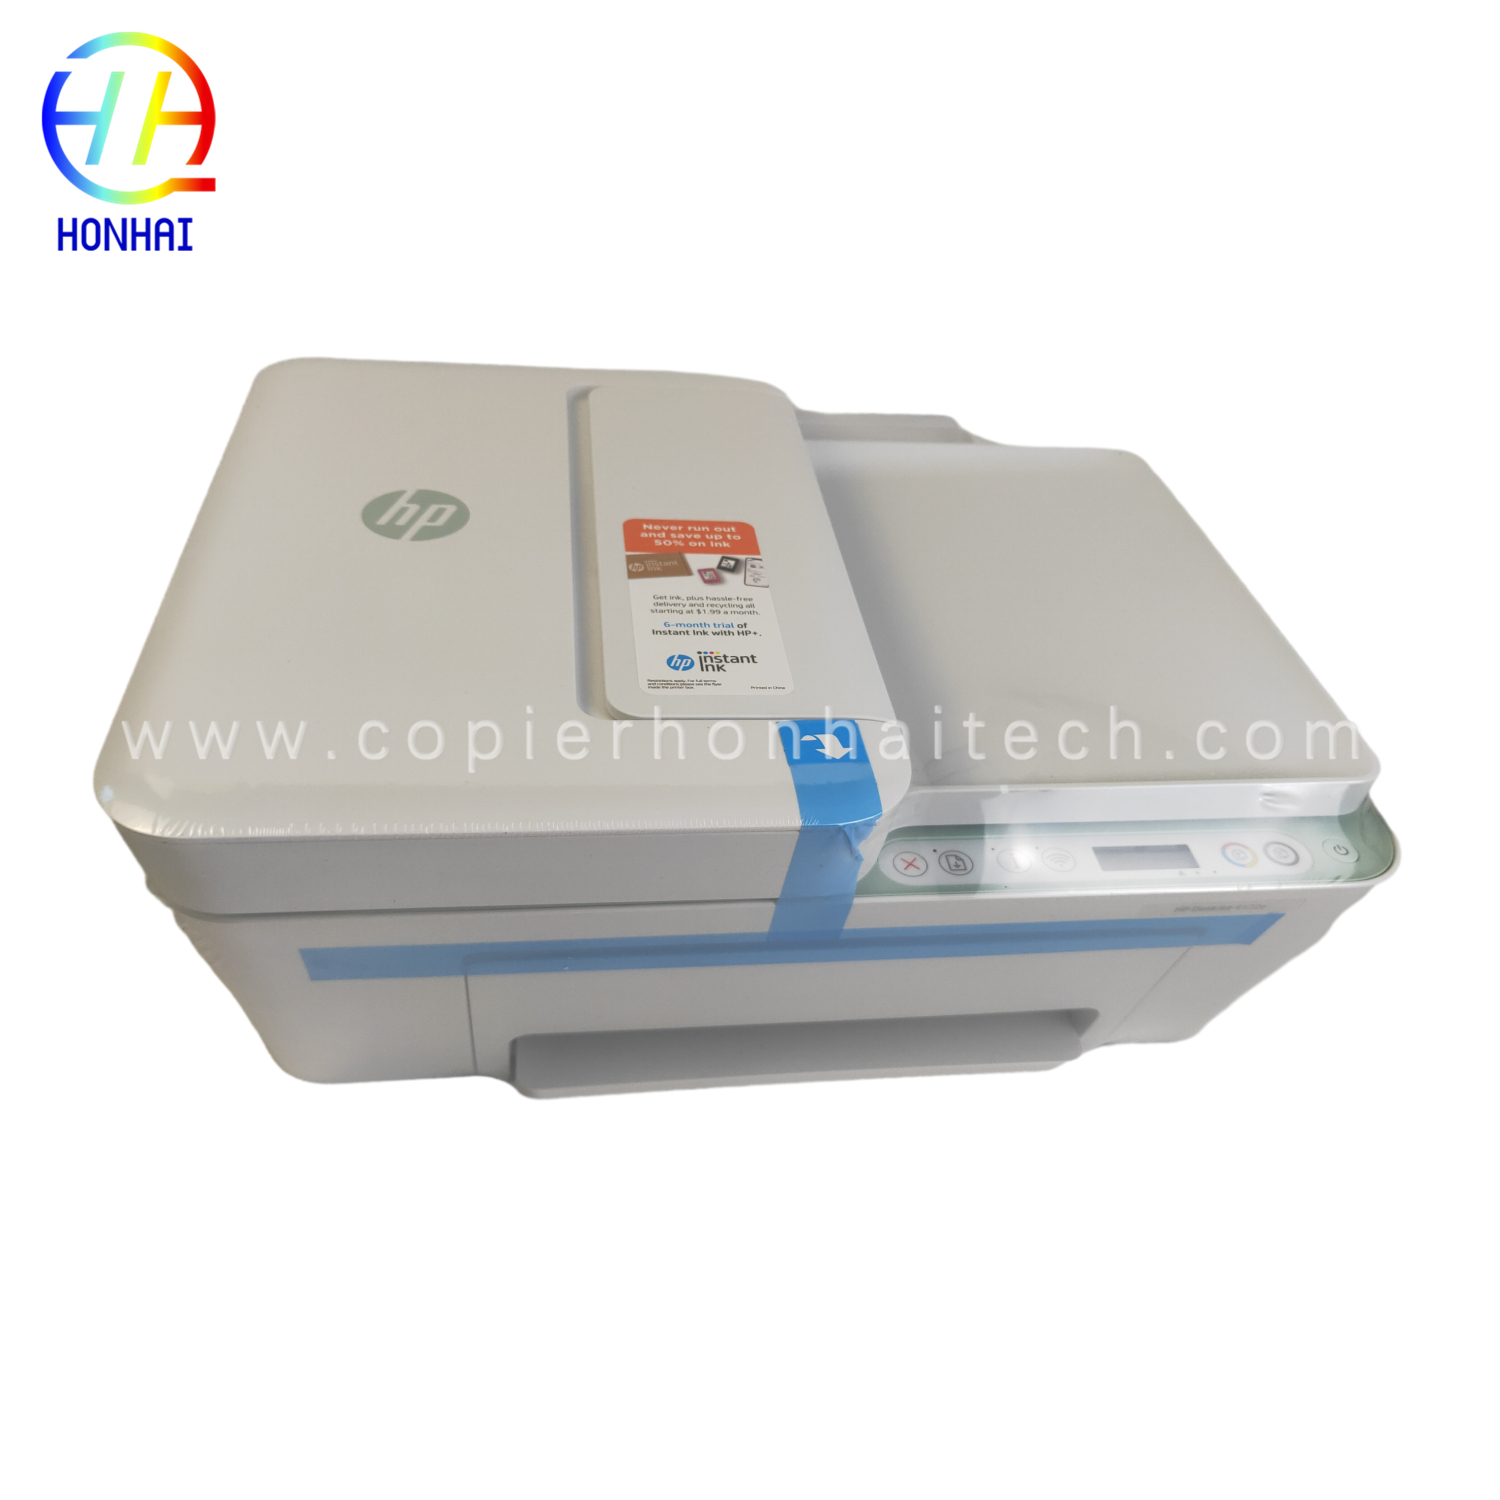 https://www.copierhonhaitech.com/original-new-wireless-printer-for-hp-deskjet-4122e-all-in-one-printer-scan-and-copy-home-office-students-and-home- printeris-26q96a-product/